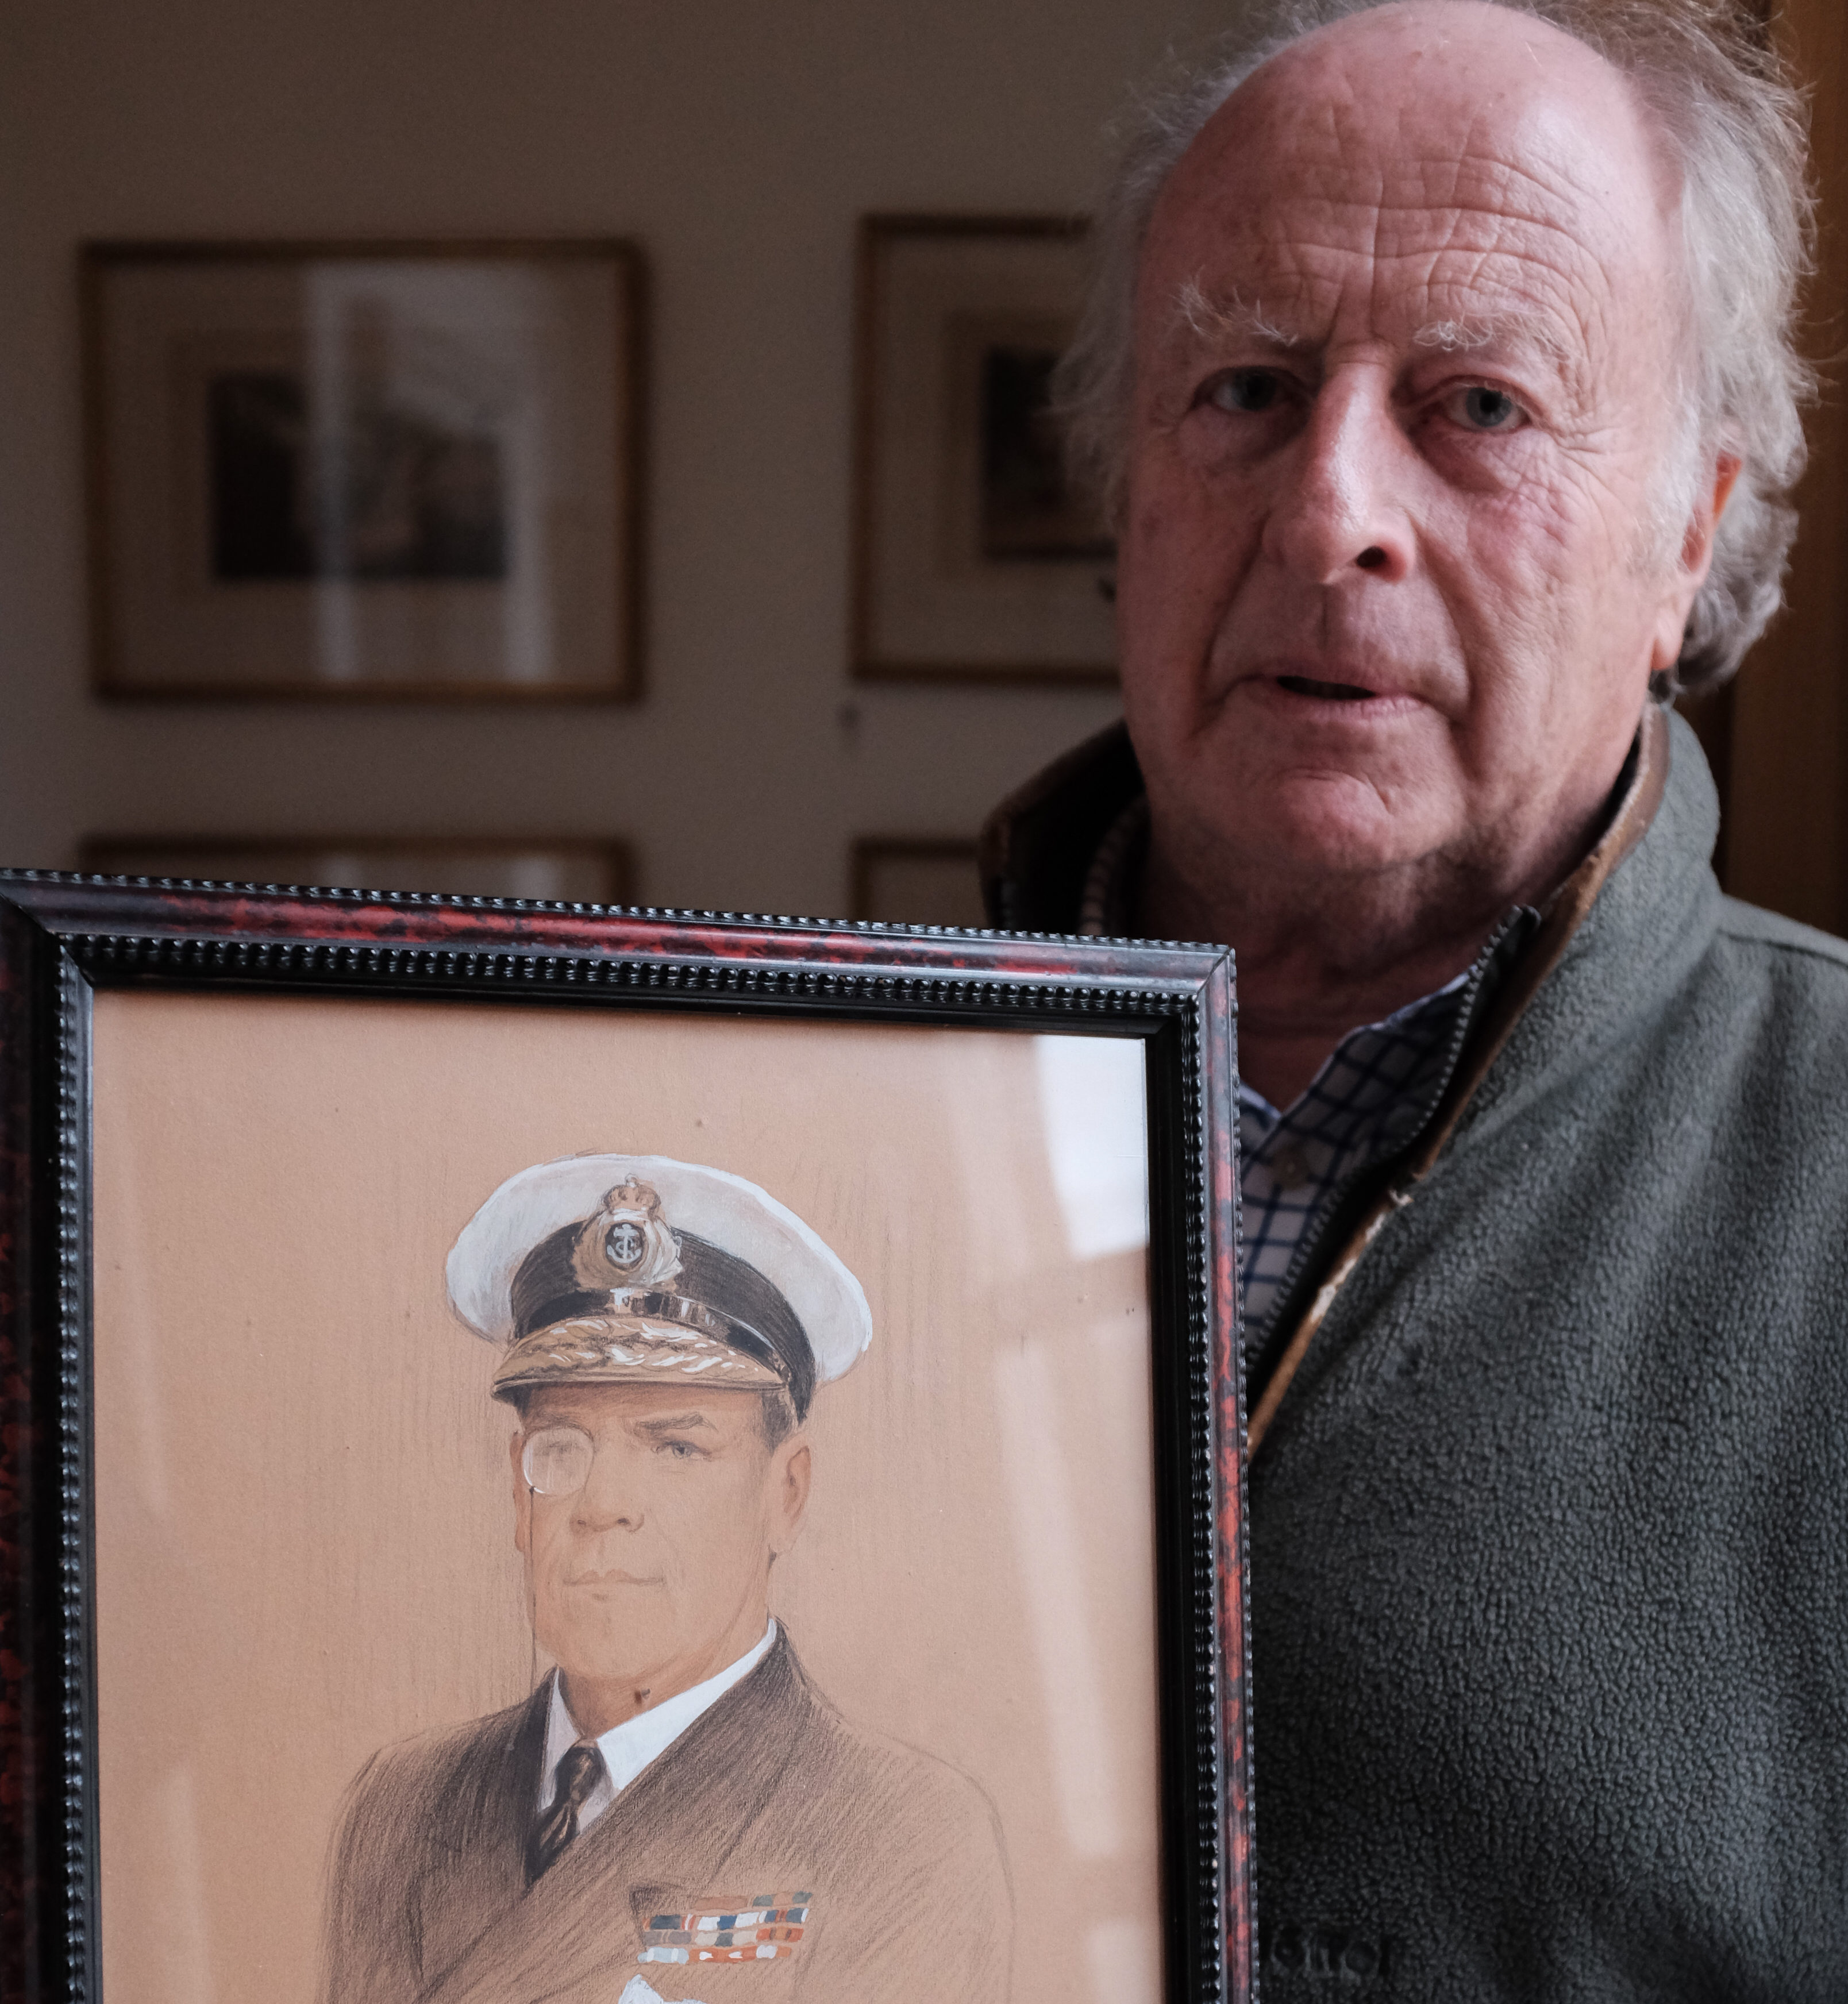 Michael Wemyss with a portrait of his great great uncle, Rosslyn Wemyss.